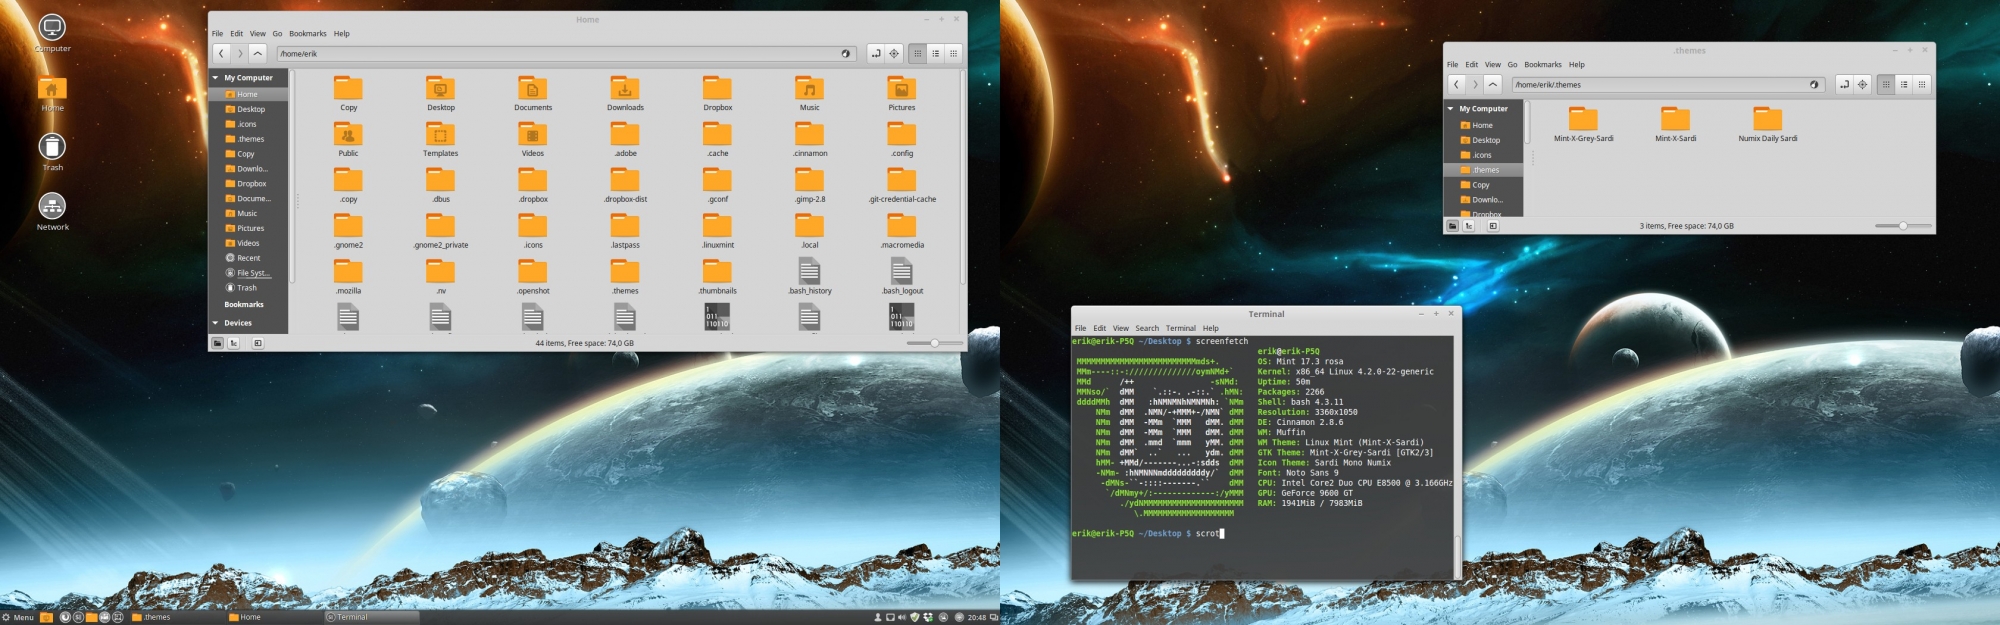 The Ultimate Update For Linux Mint Erik Dubois